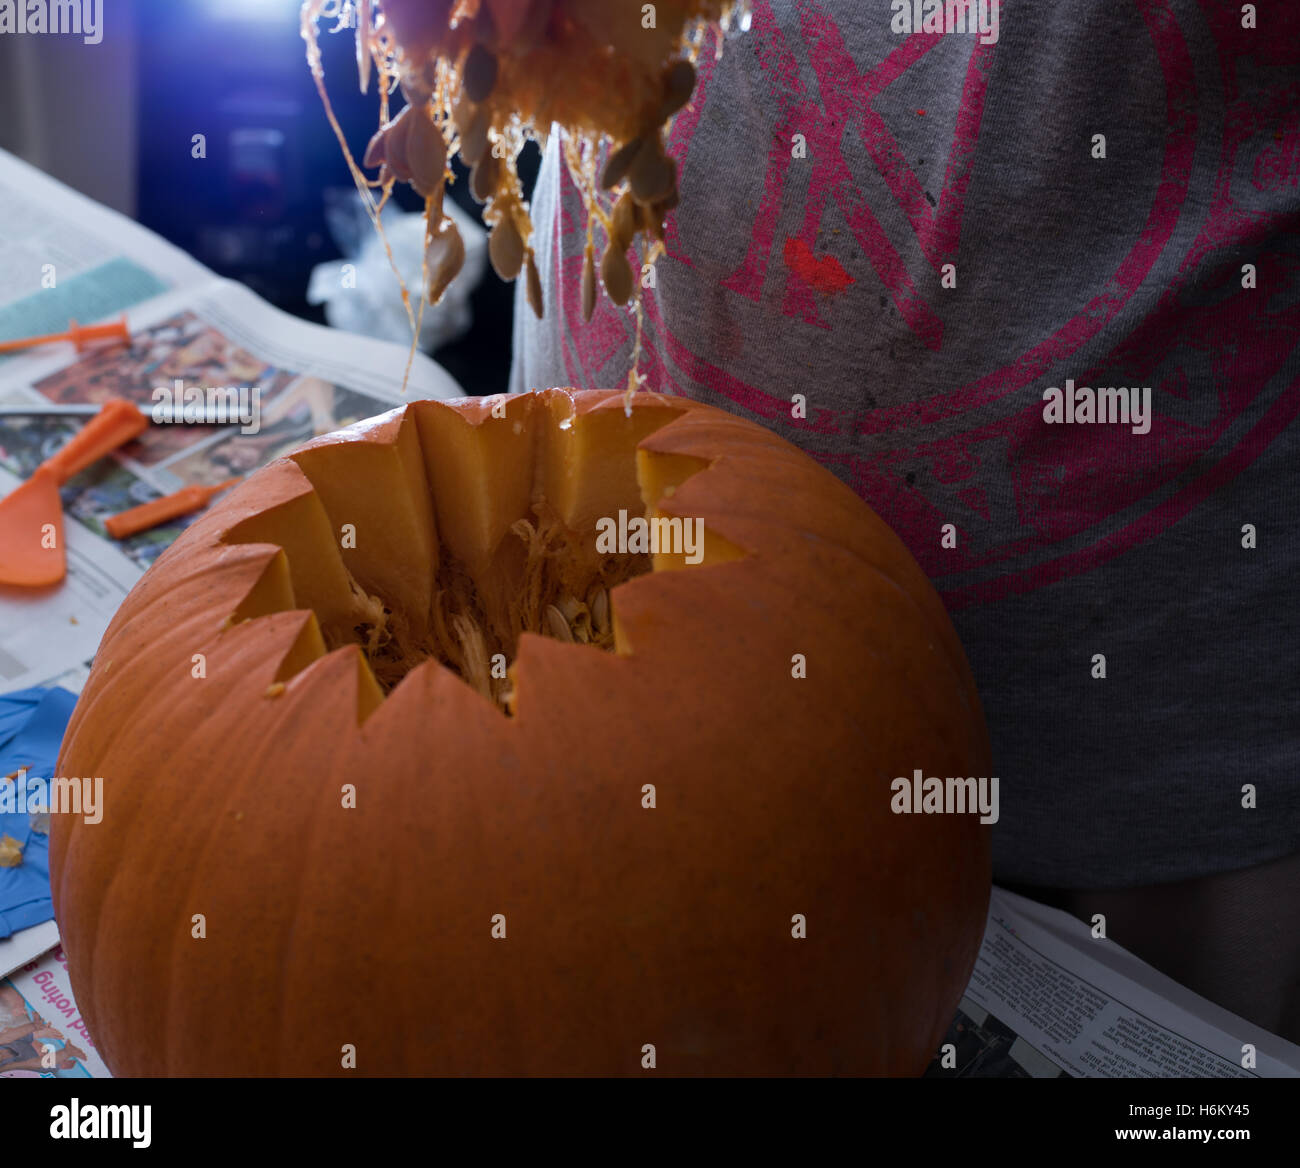 La zucca carving, scooping out Foto Stock